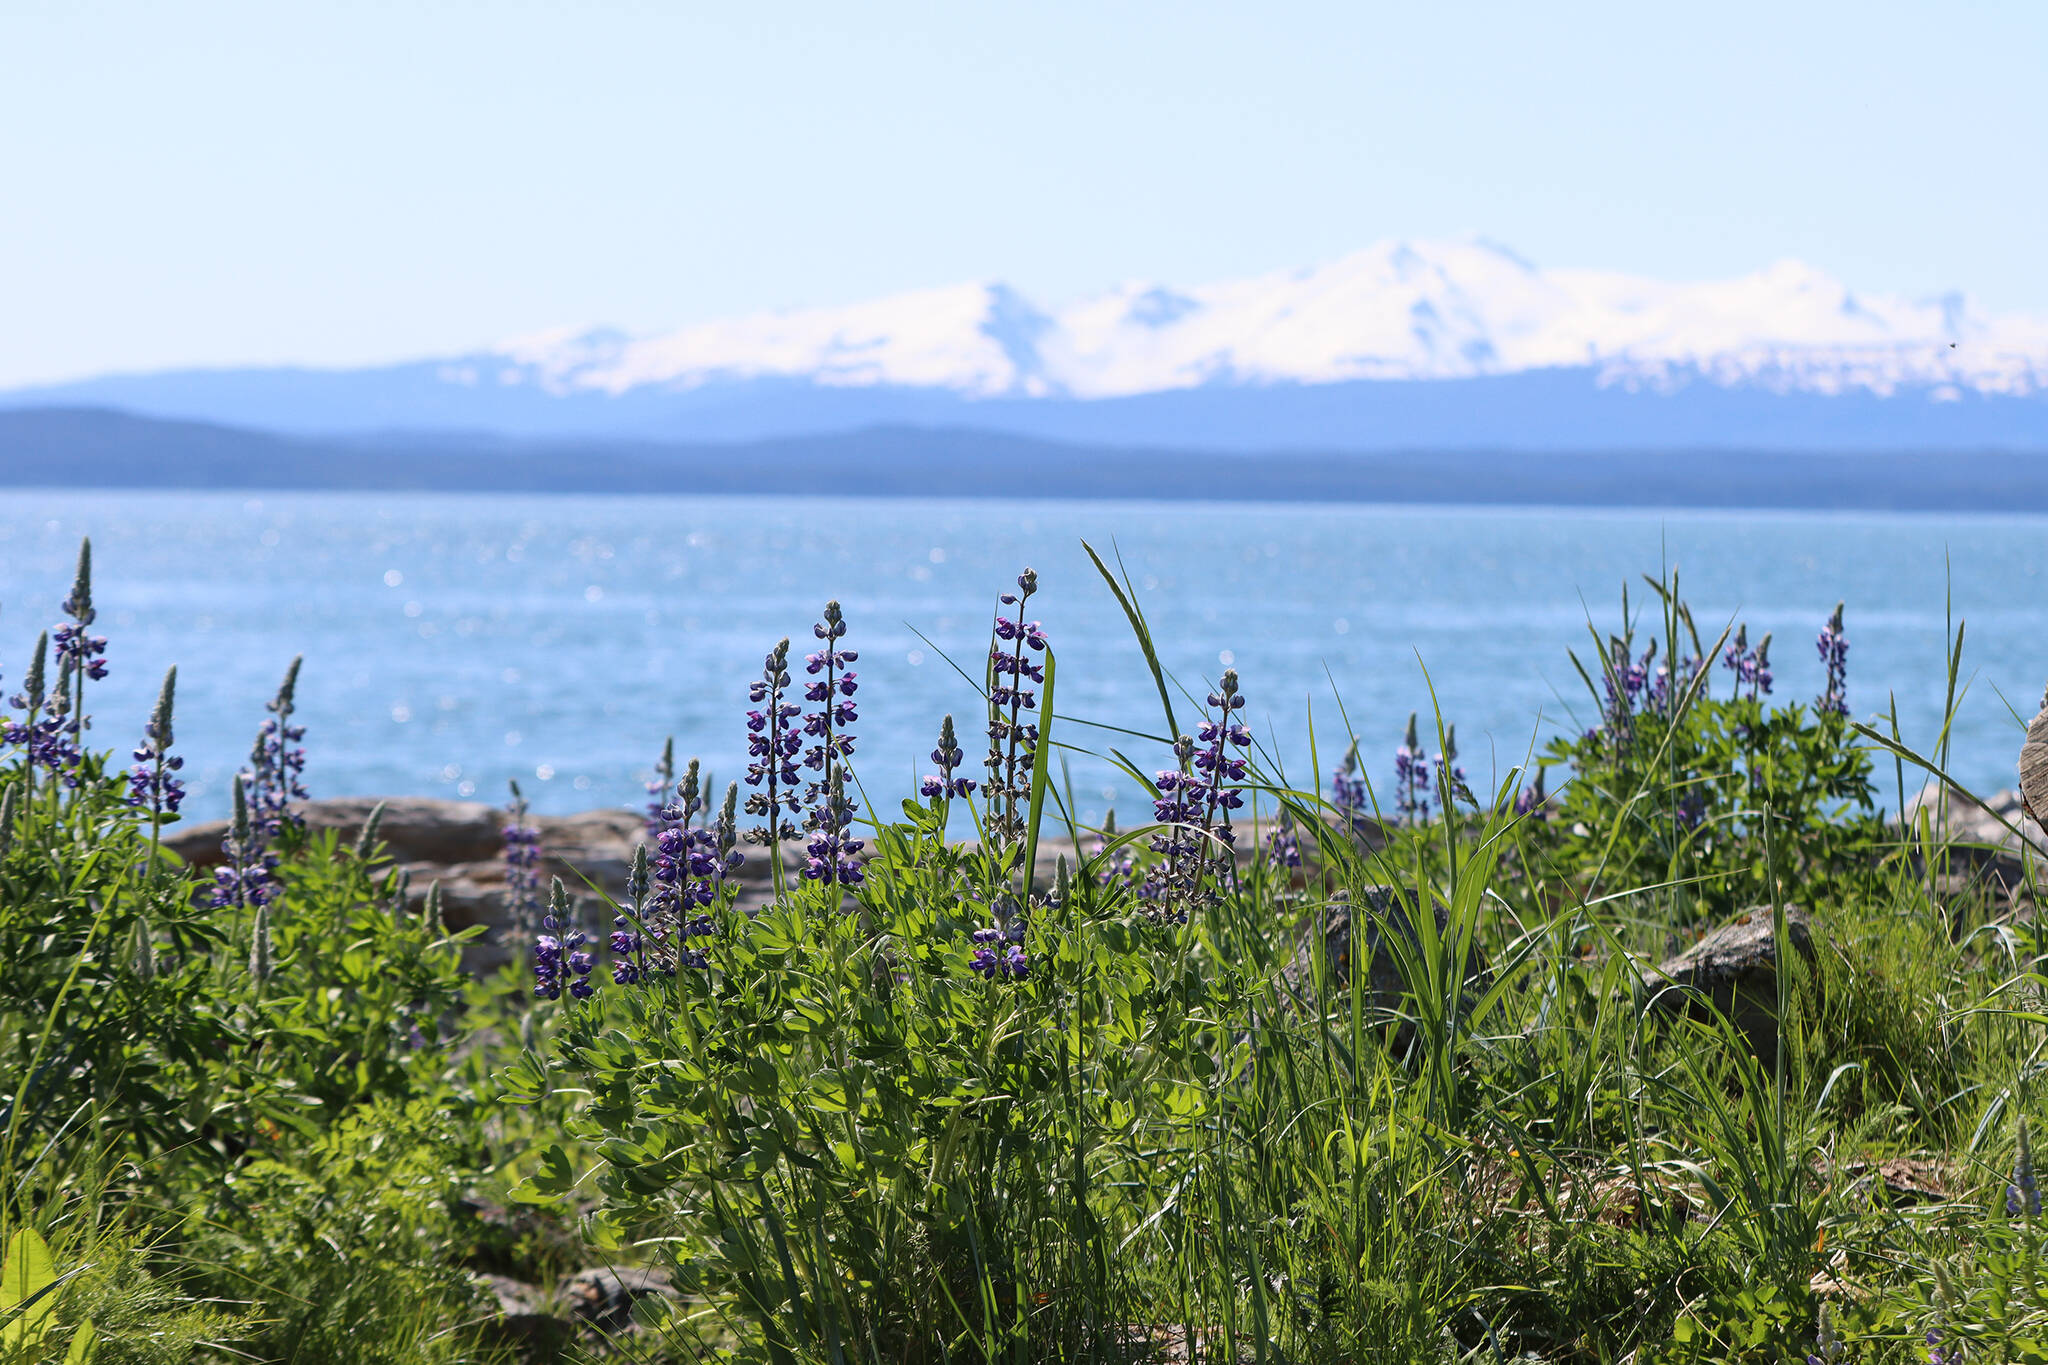 This photo shows a sun-soaked view from Point Louisa on Tuesday. According to the National Weather Service, Juneau’s sunny streak, and an accompanying heatwave, is expected to last until this weekend. (Ben Hohenstatt / Juneau Empire)